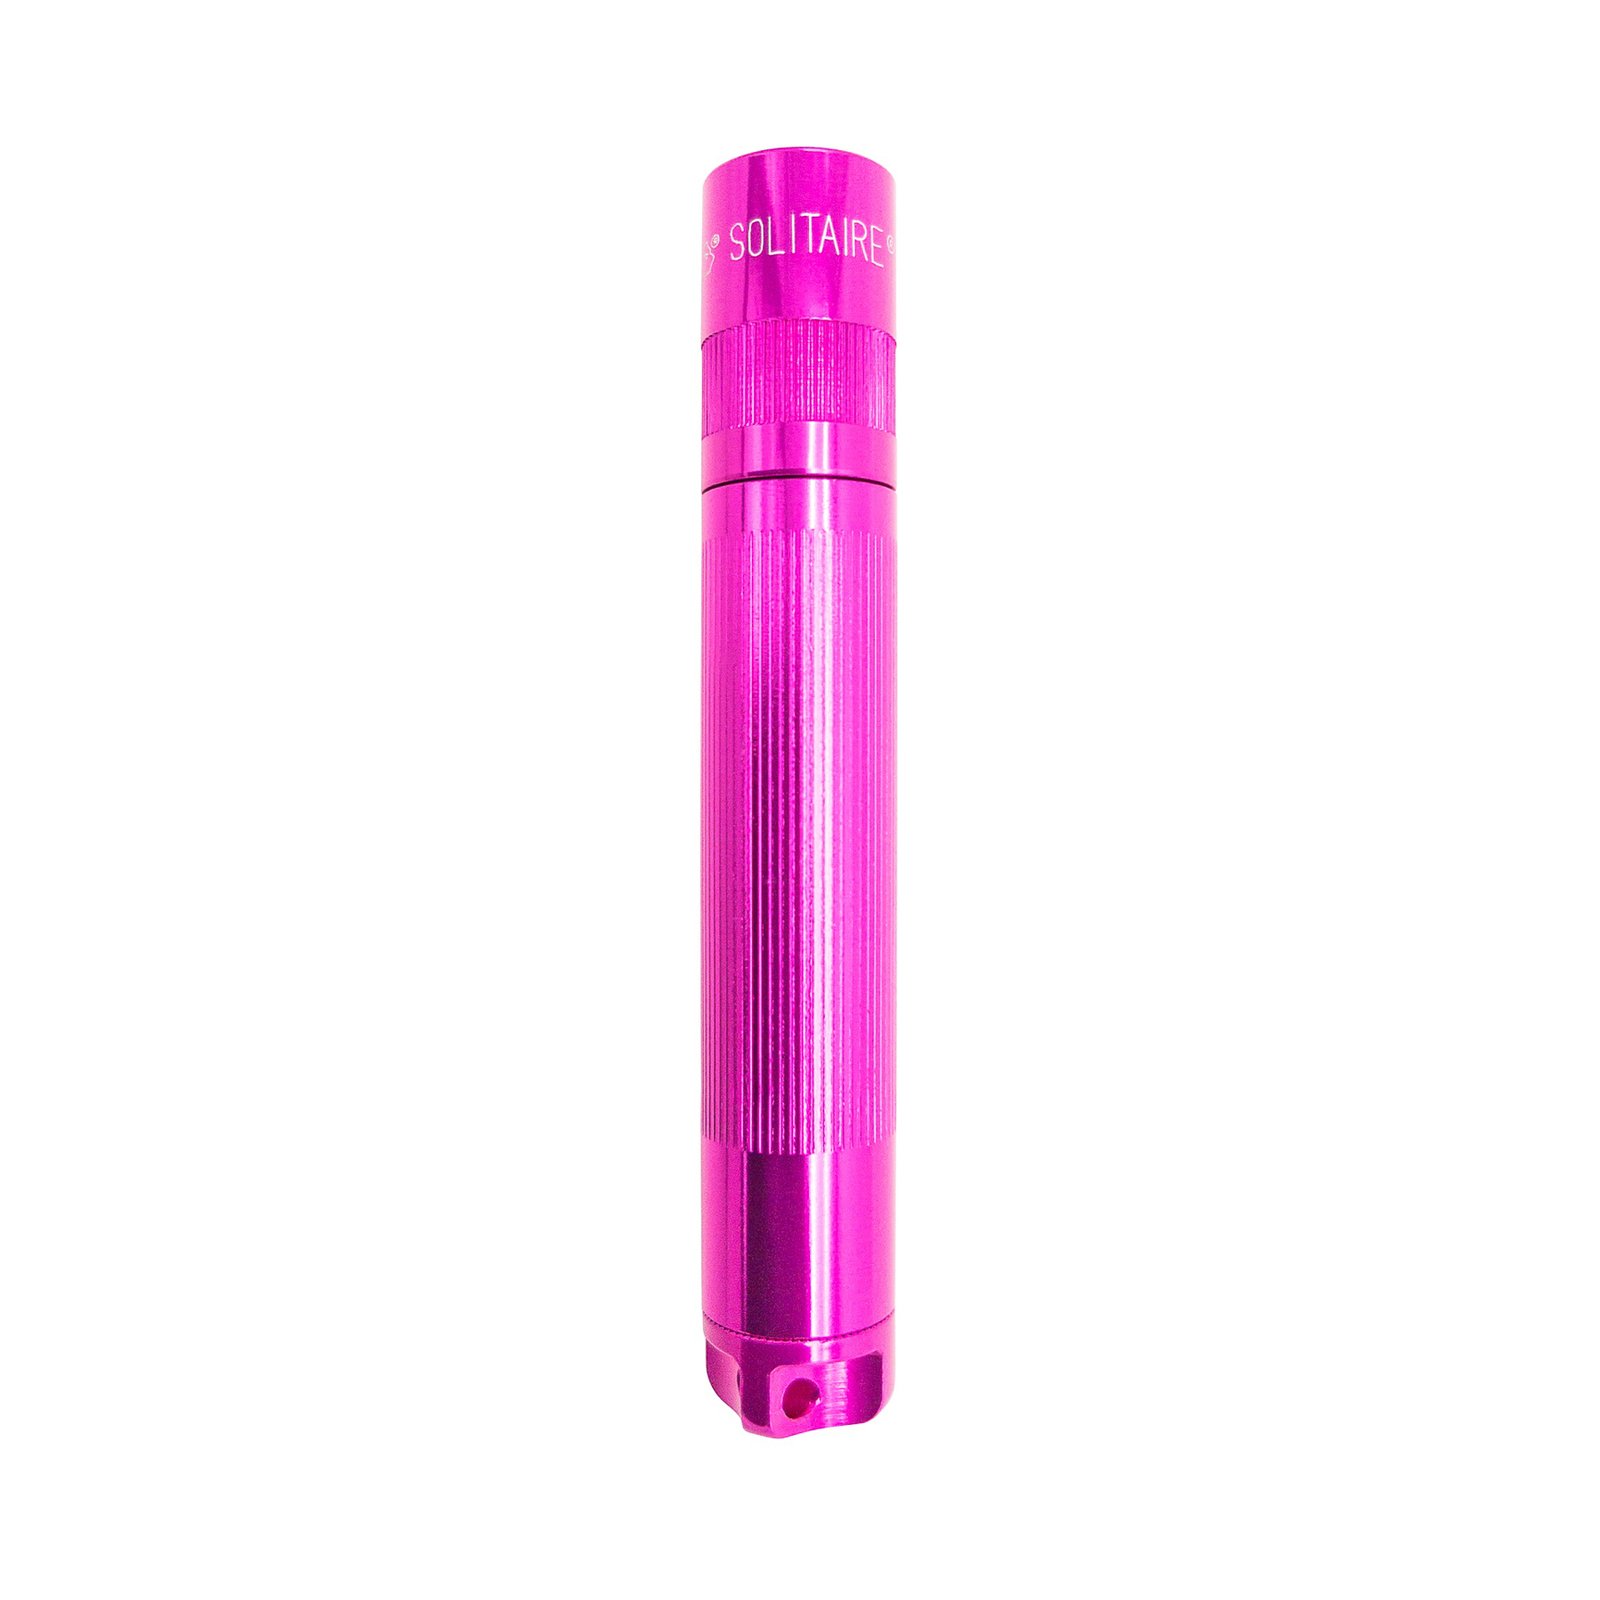 Torcia Maglite Xenon Solitaire 1 Cell AAA, Box, rosa